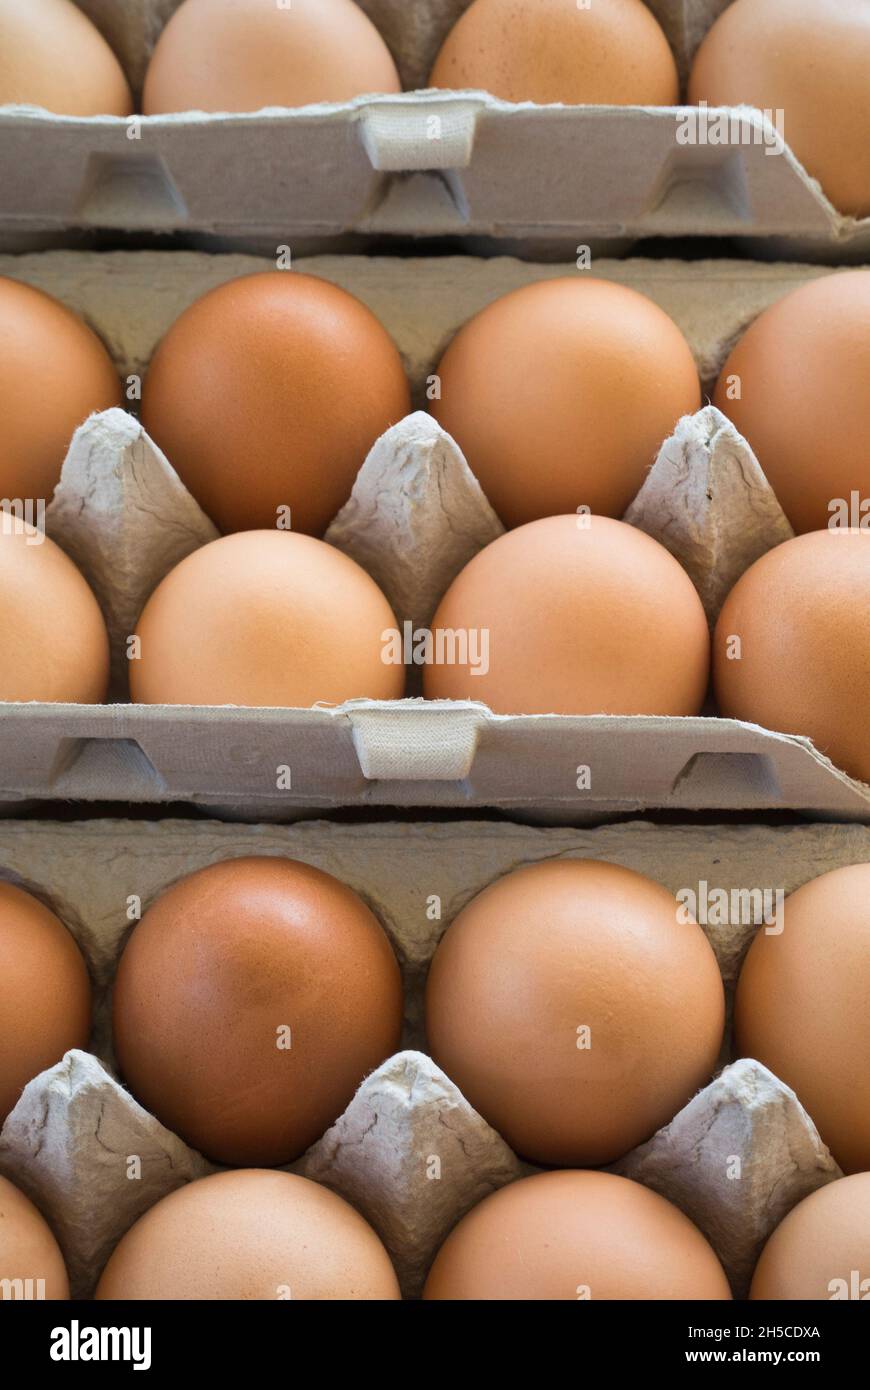 Eggs on Display for Sale Stock Photo